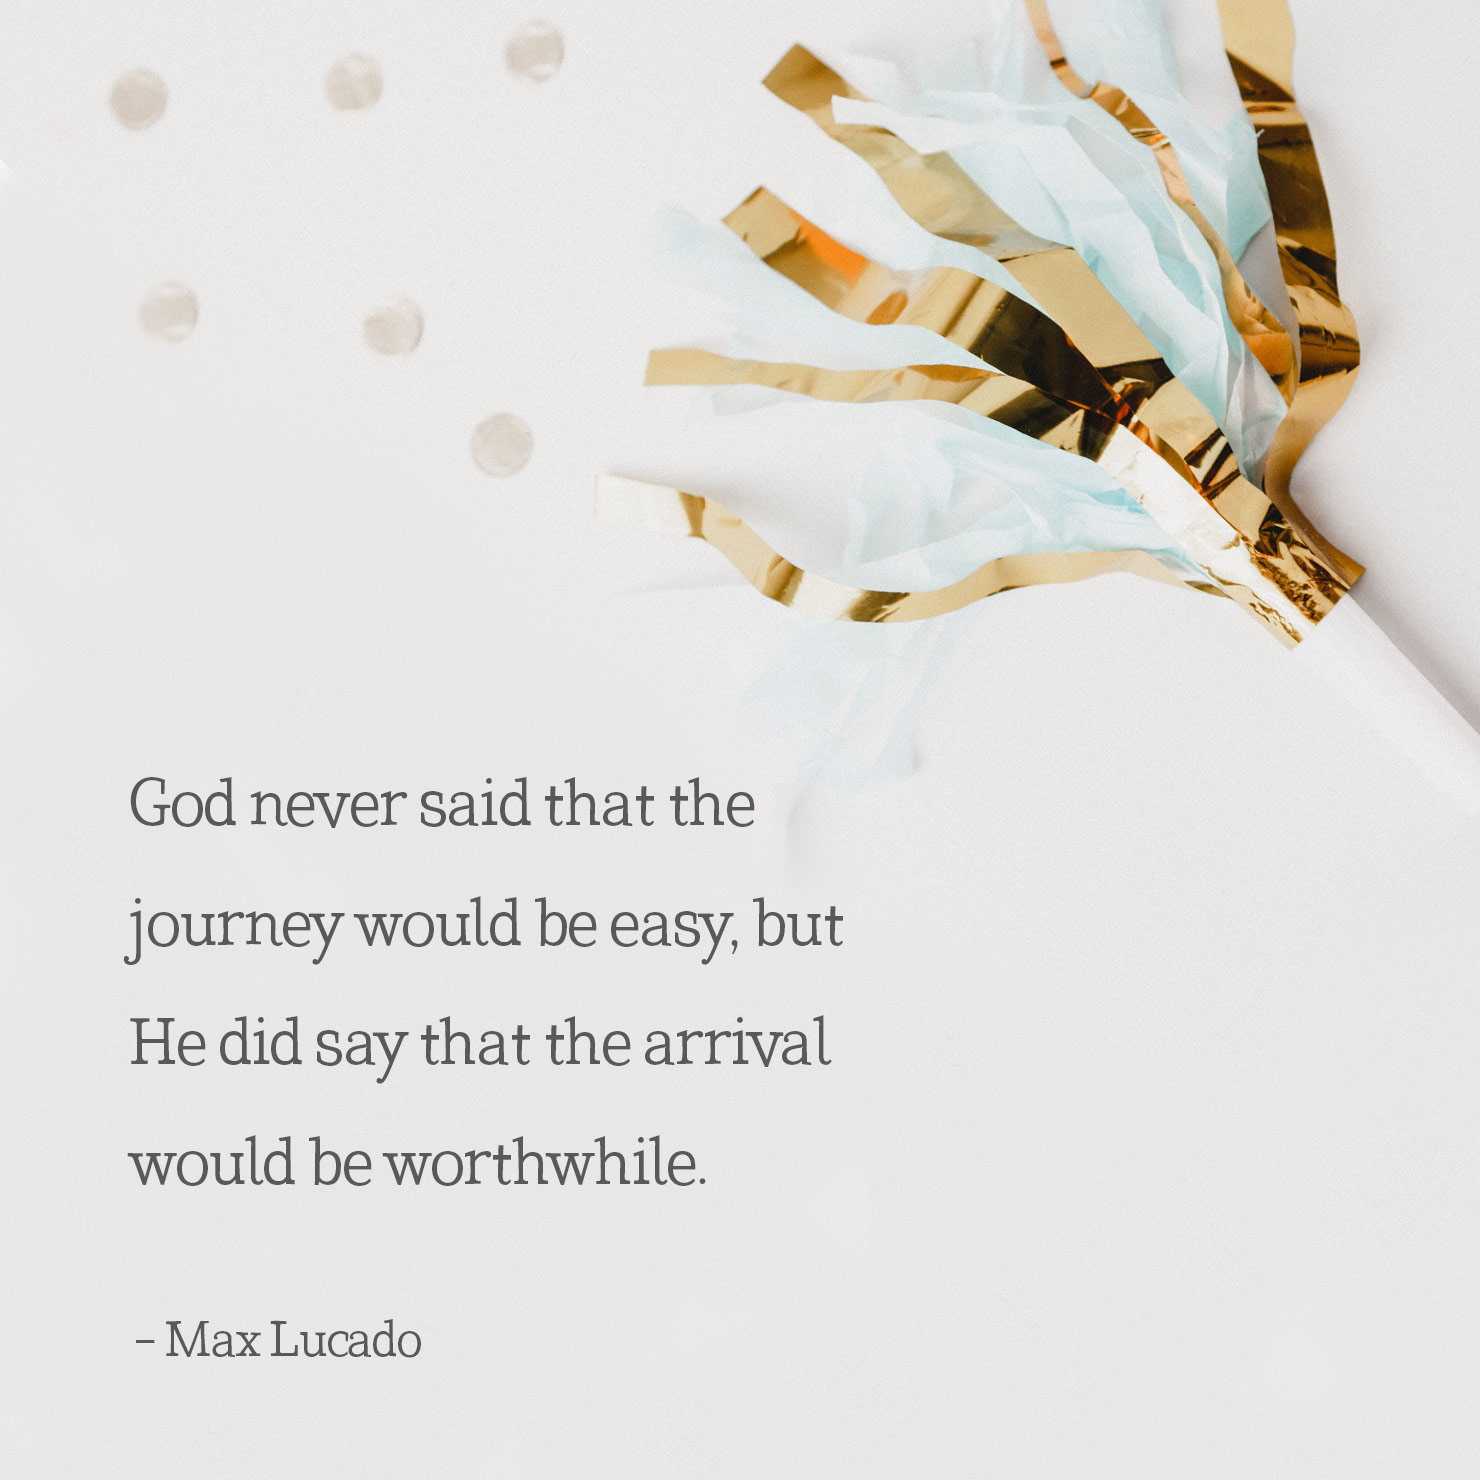 religious graduation quote: God never said that the journey would be easy, but He did say that the arrival would be worthwhile - Max Lucado